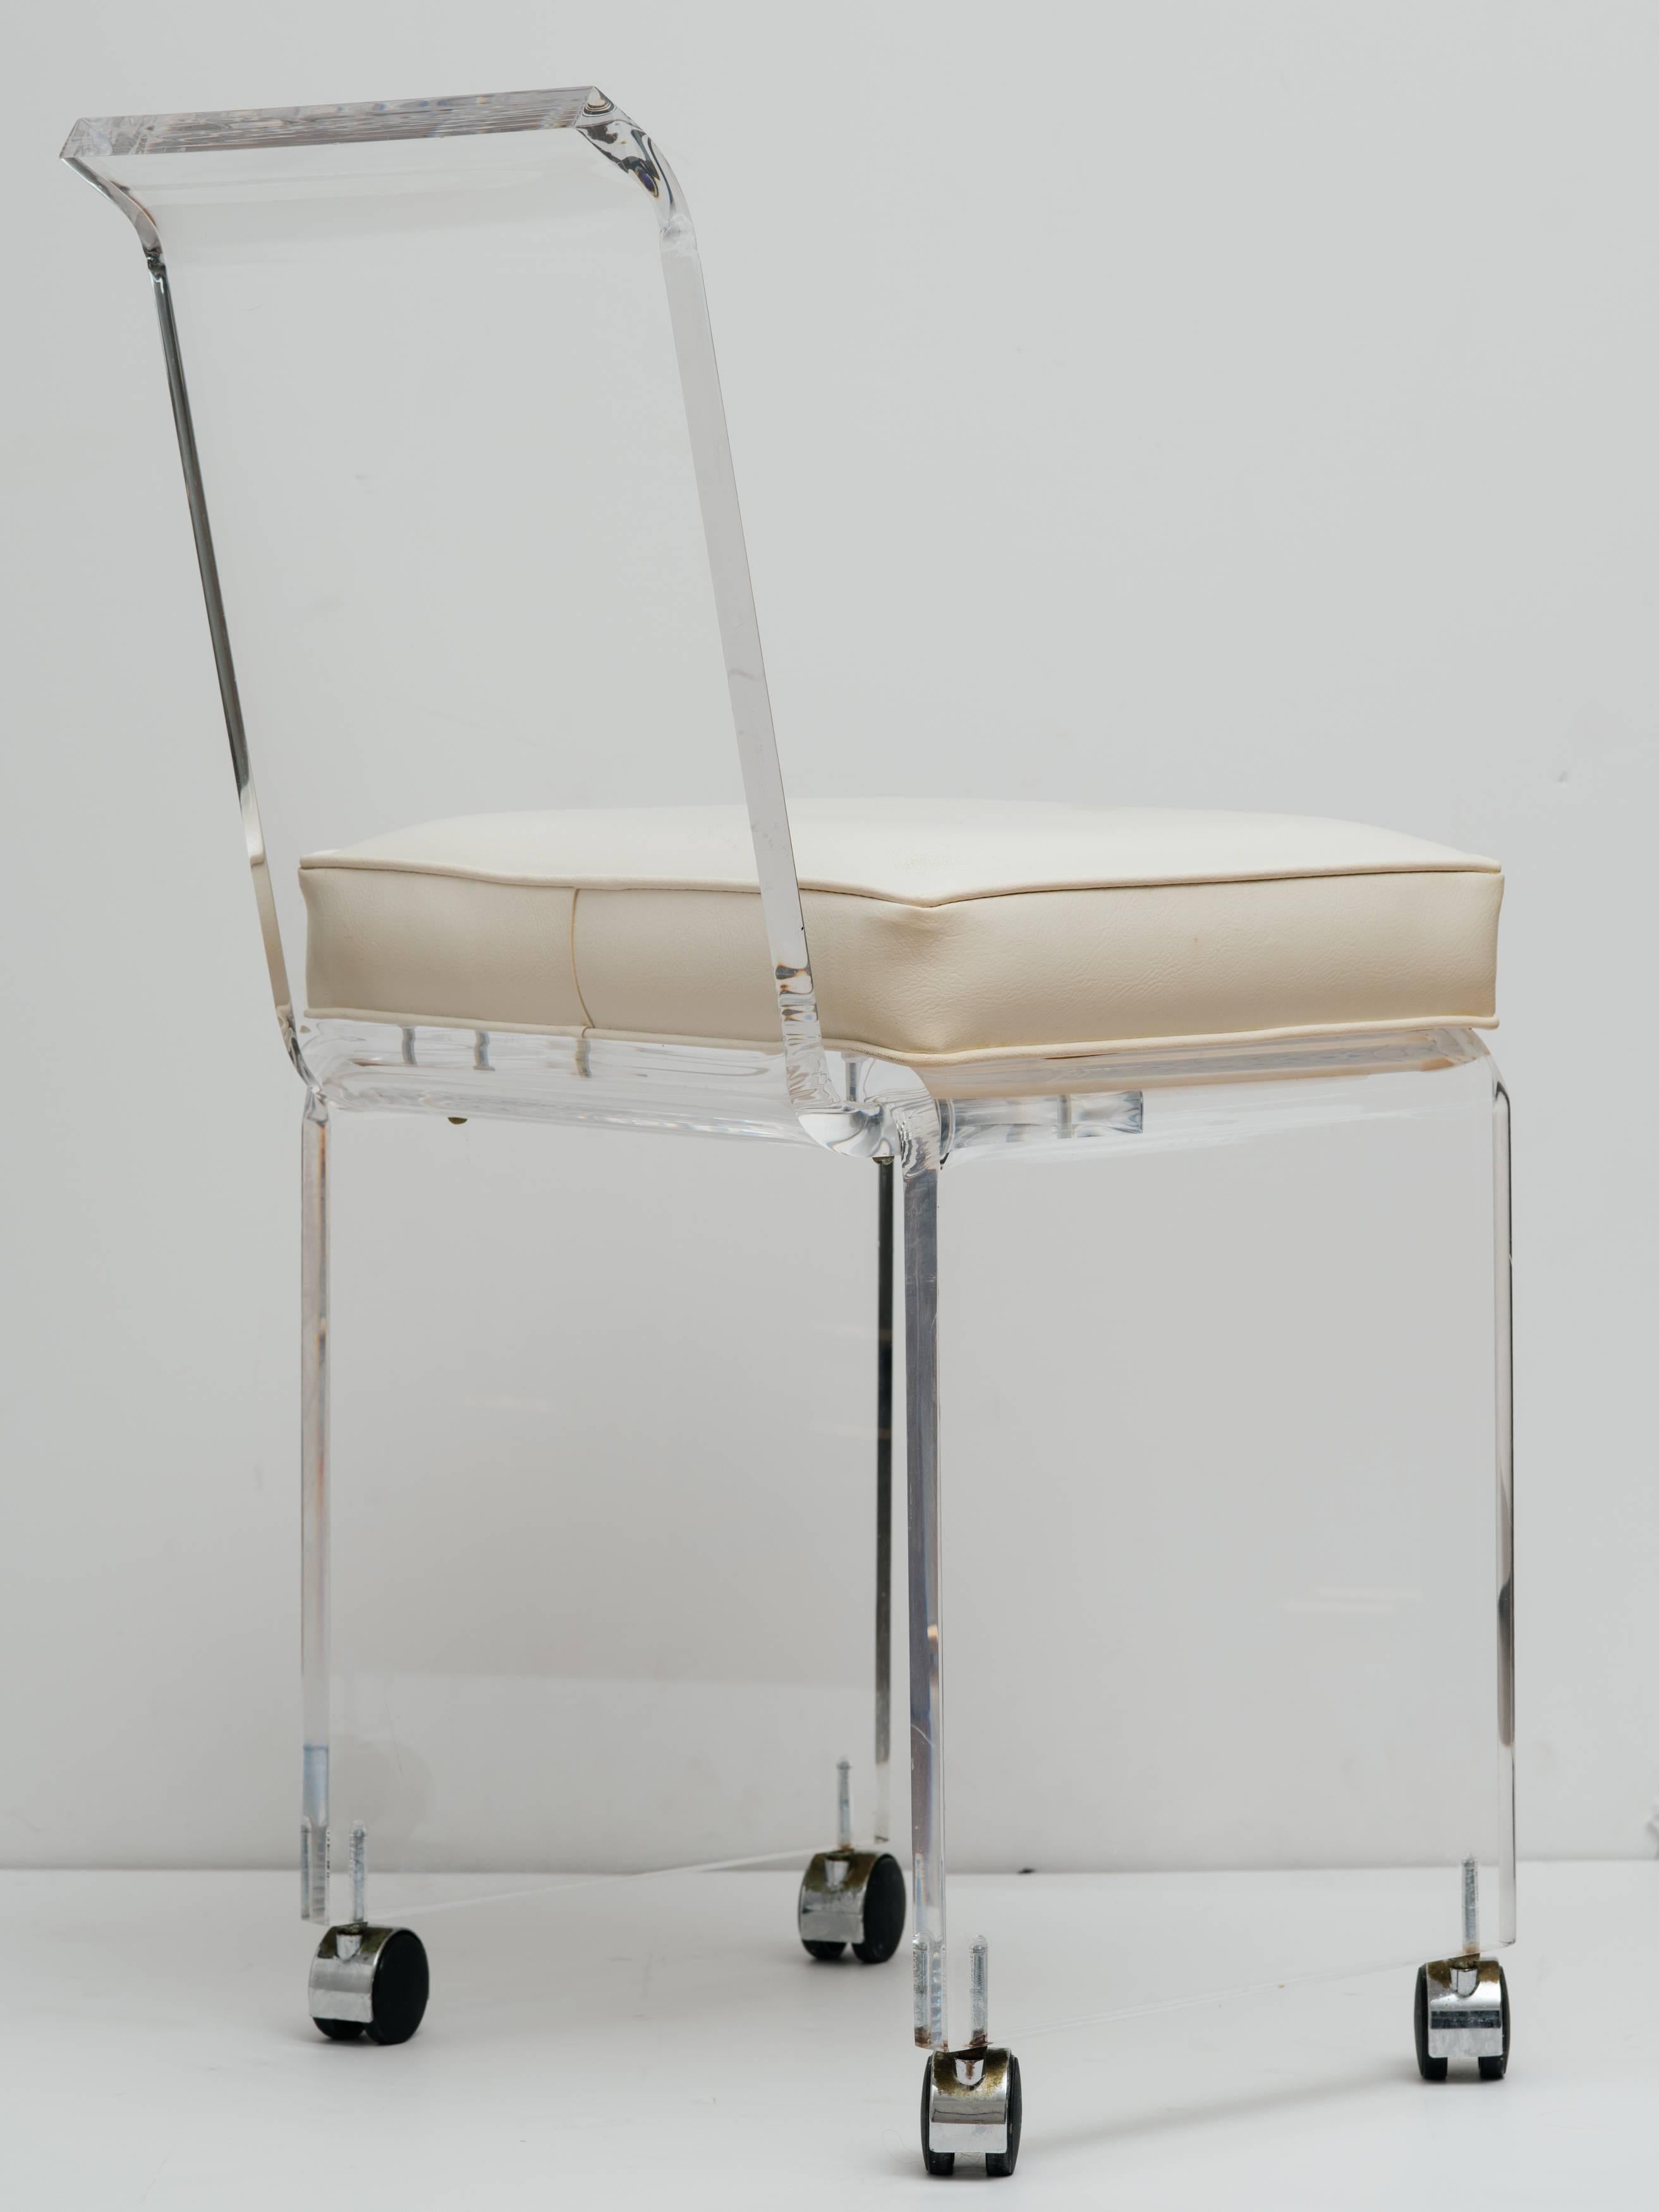 Mid century modern lucite vanity chair with full back design. The vanity stool has a sleek streamline design with polished beveled edges. Features swivel casters for effortless movement. Shown with original white naugahyde seat. Price includes